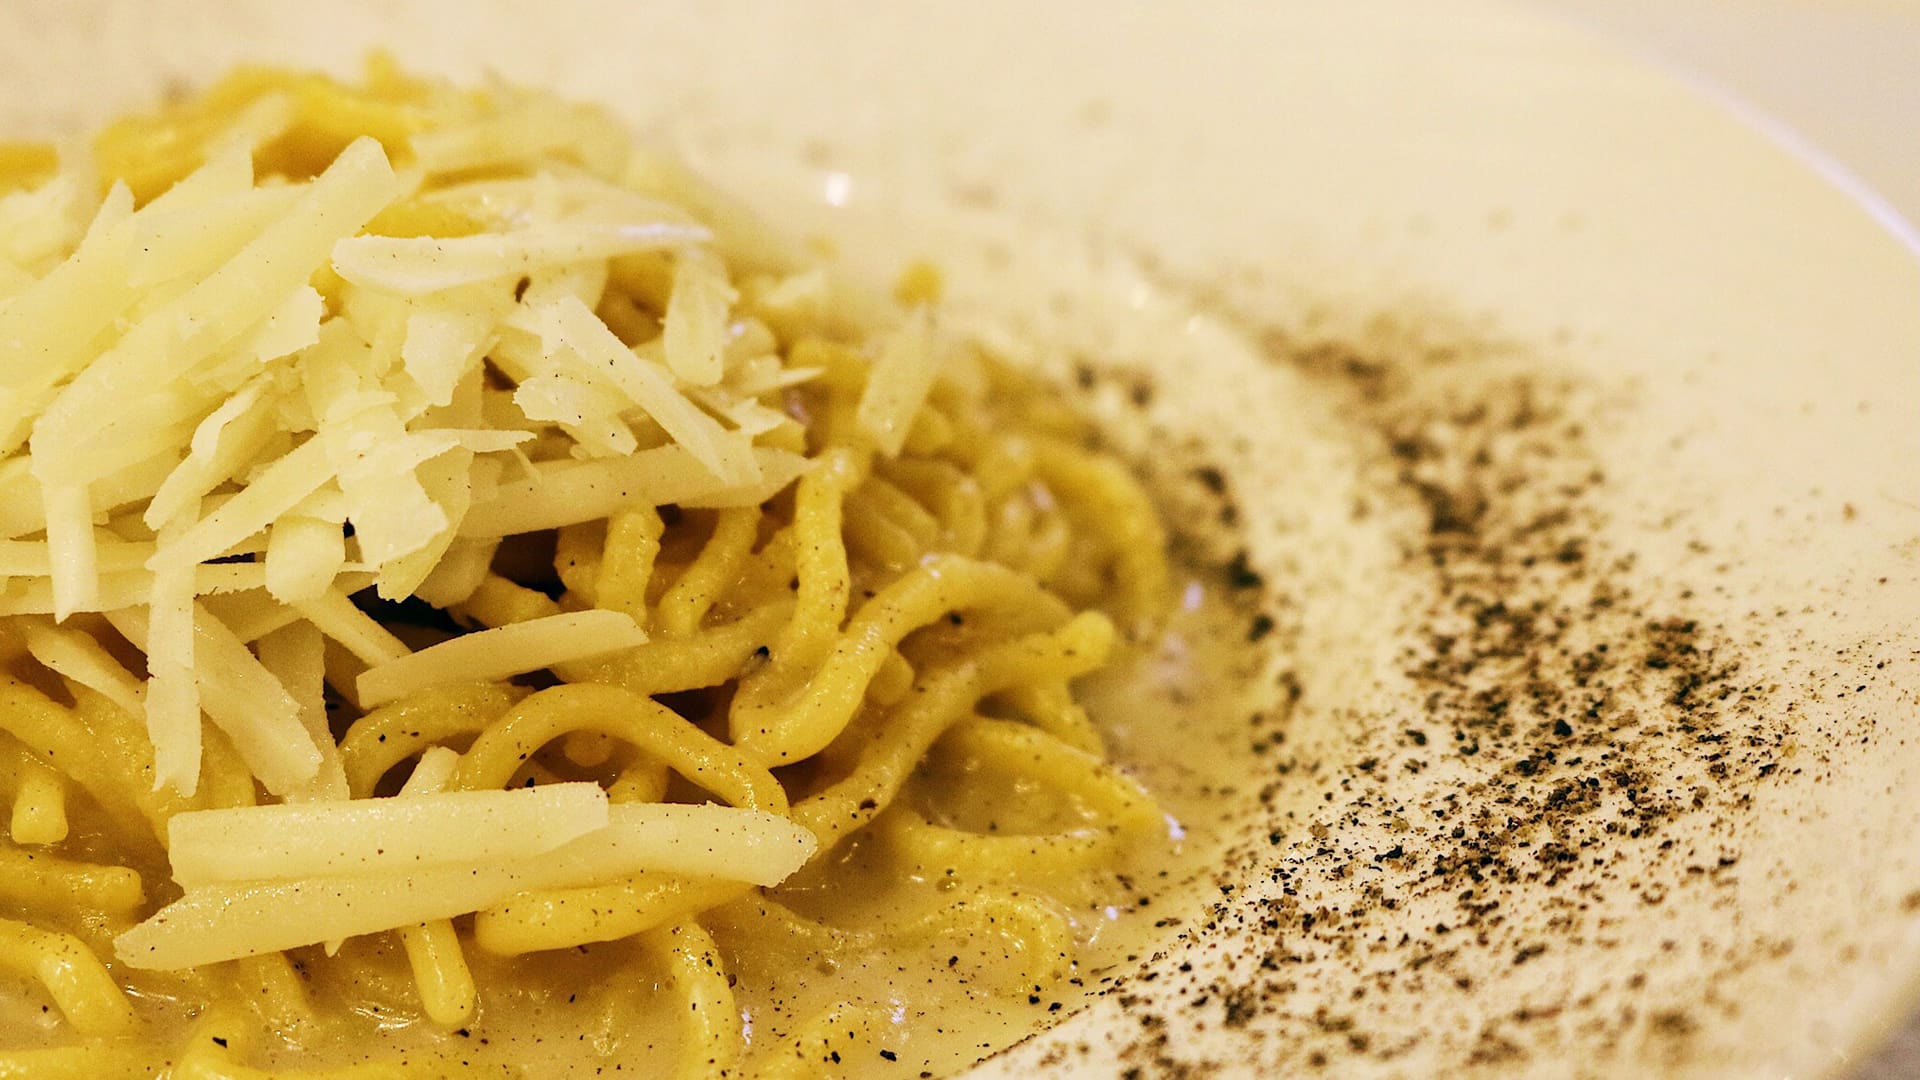 A close up of spaghetti with shredded cheese on top